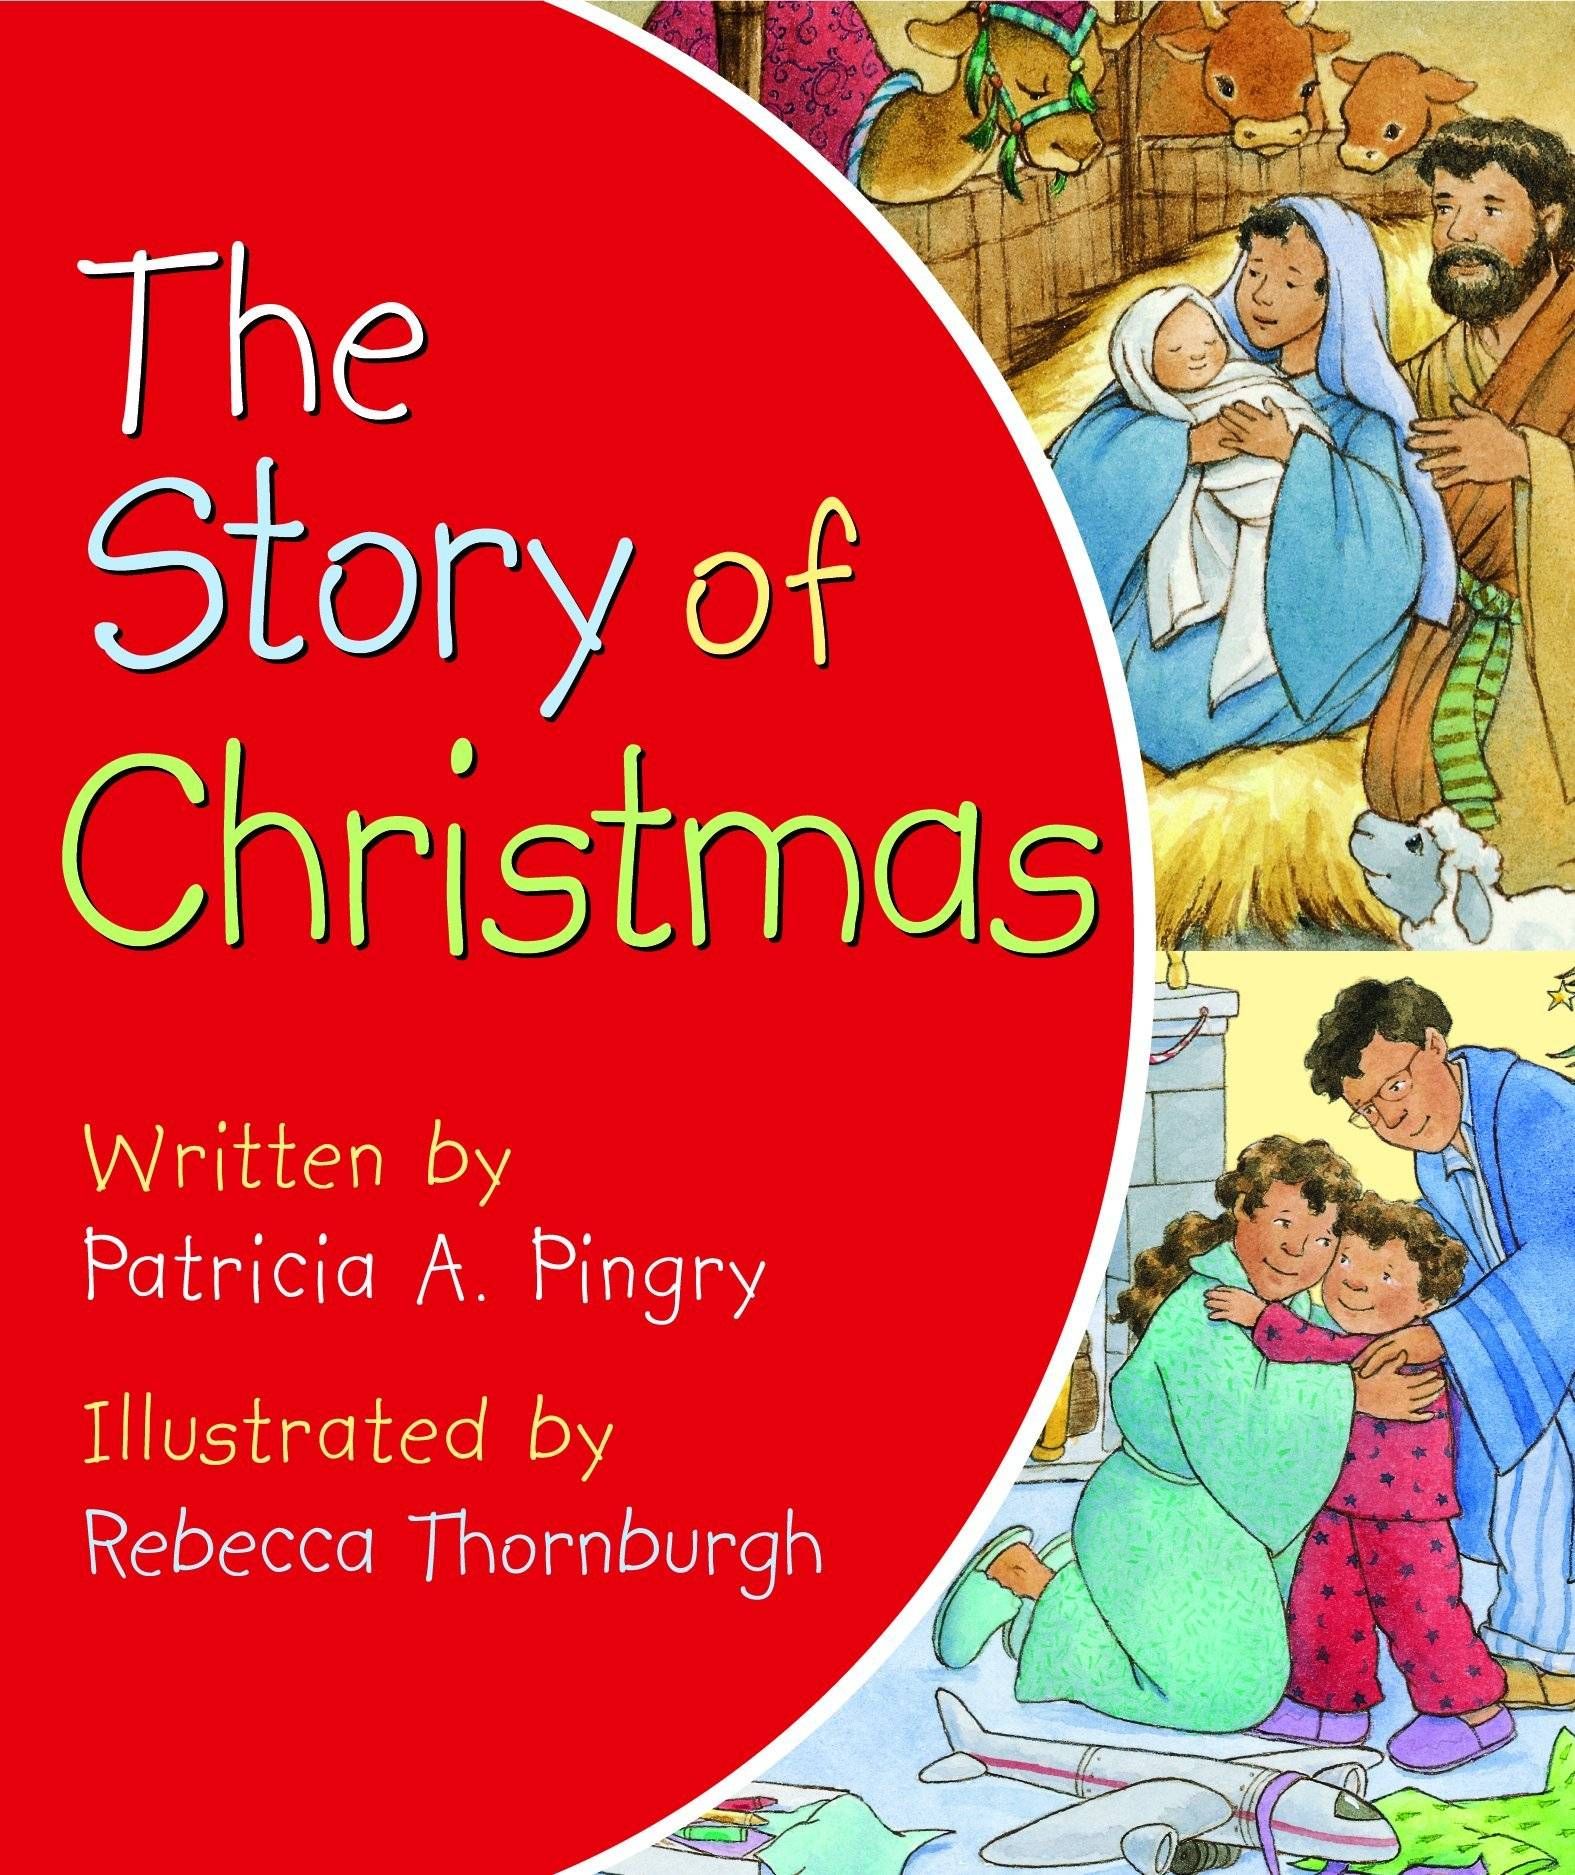 Christmas Books | The Story of Christmas by Patricia A. Pingry